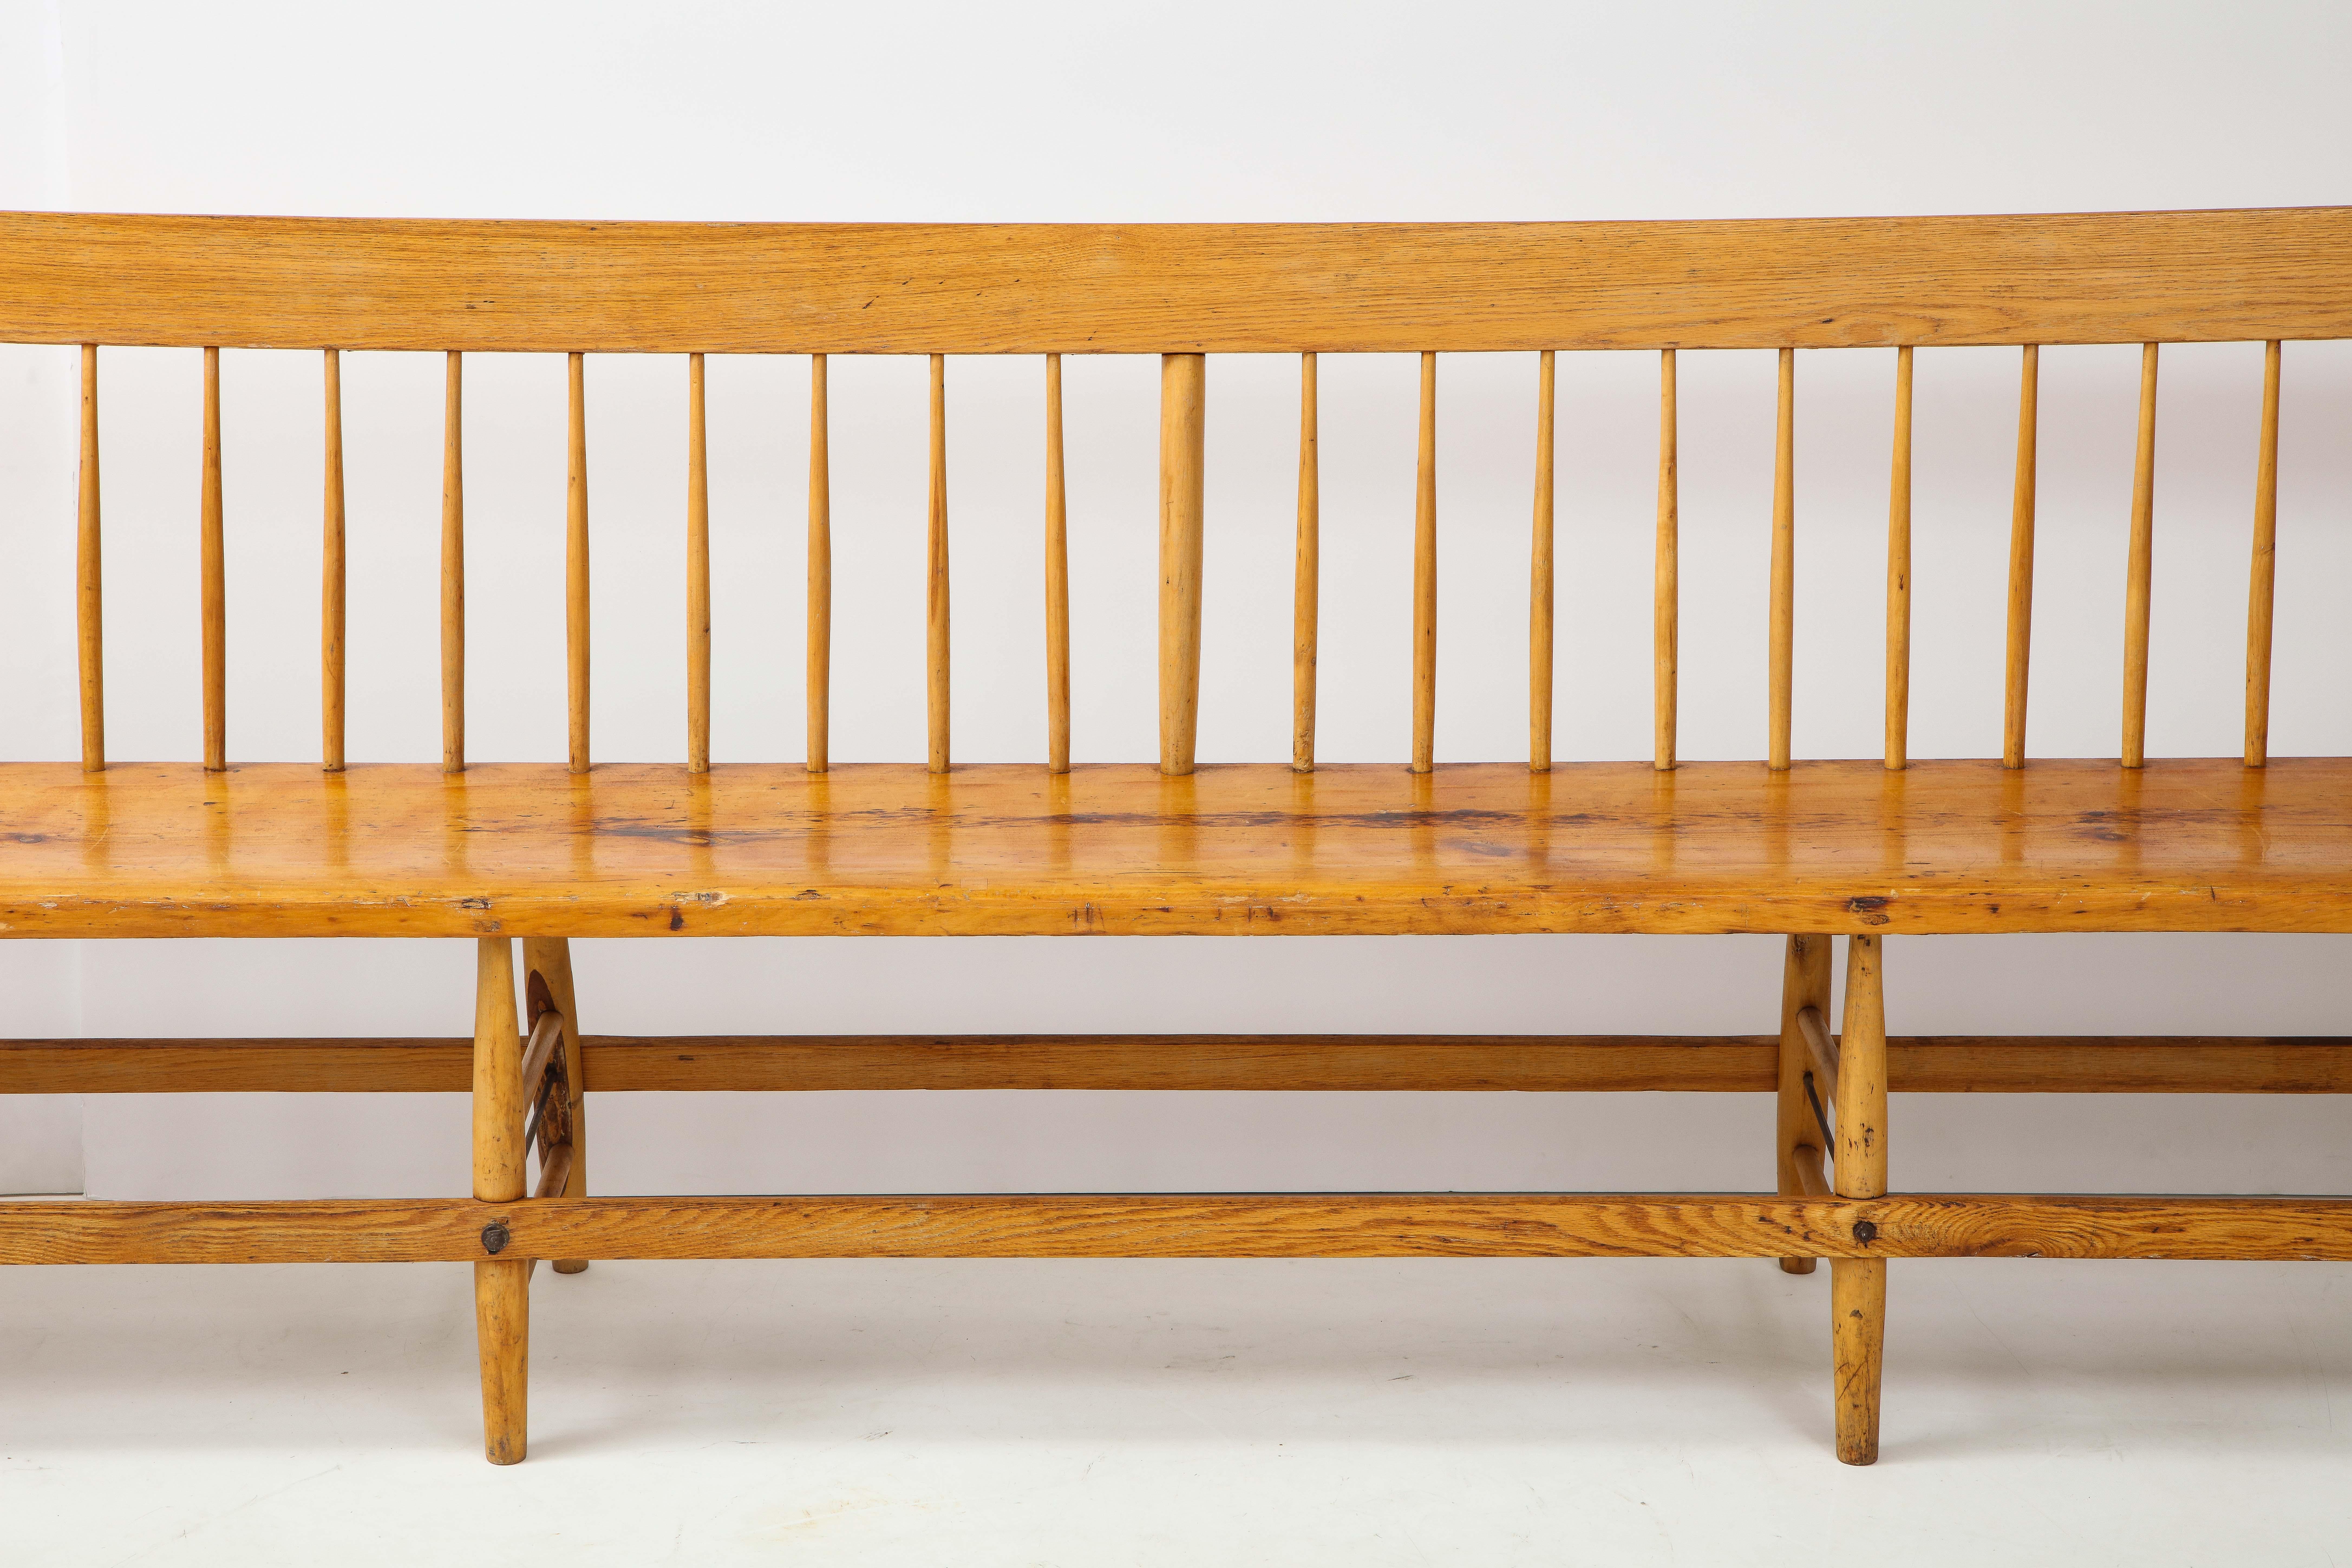 American Exceptional 19th C. Hand Made Quaker Meeting House Bench, New England/Cape Cod